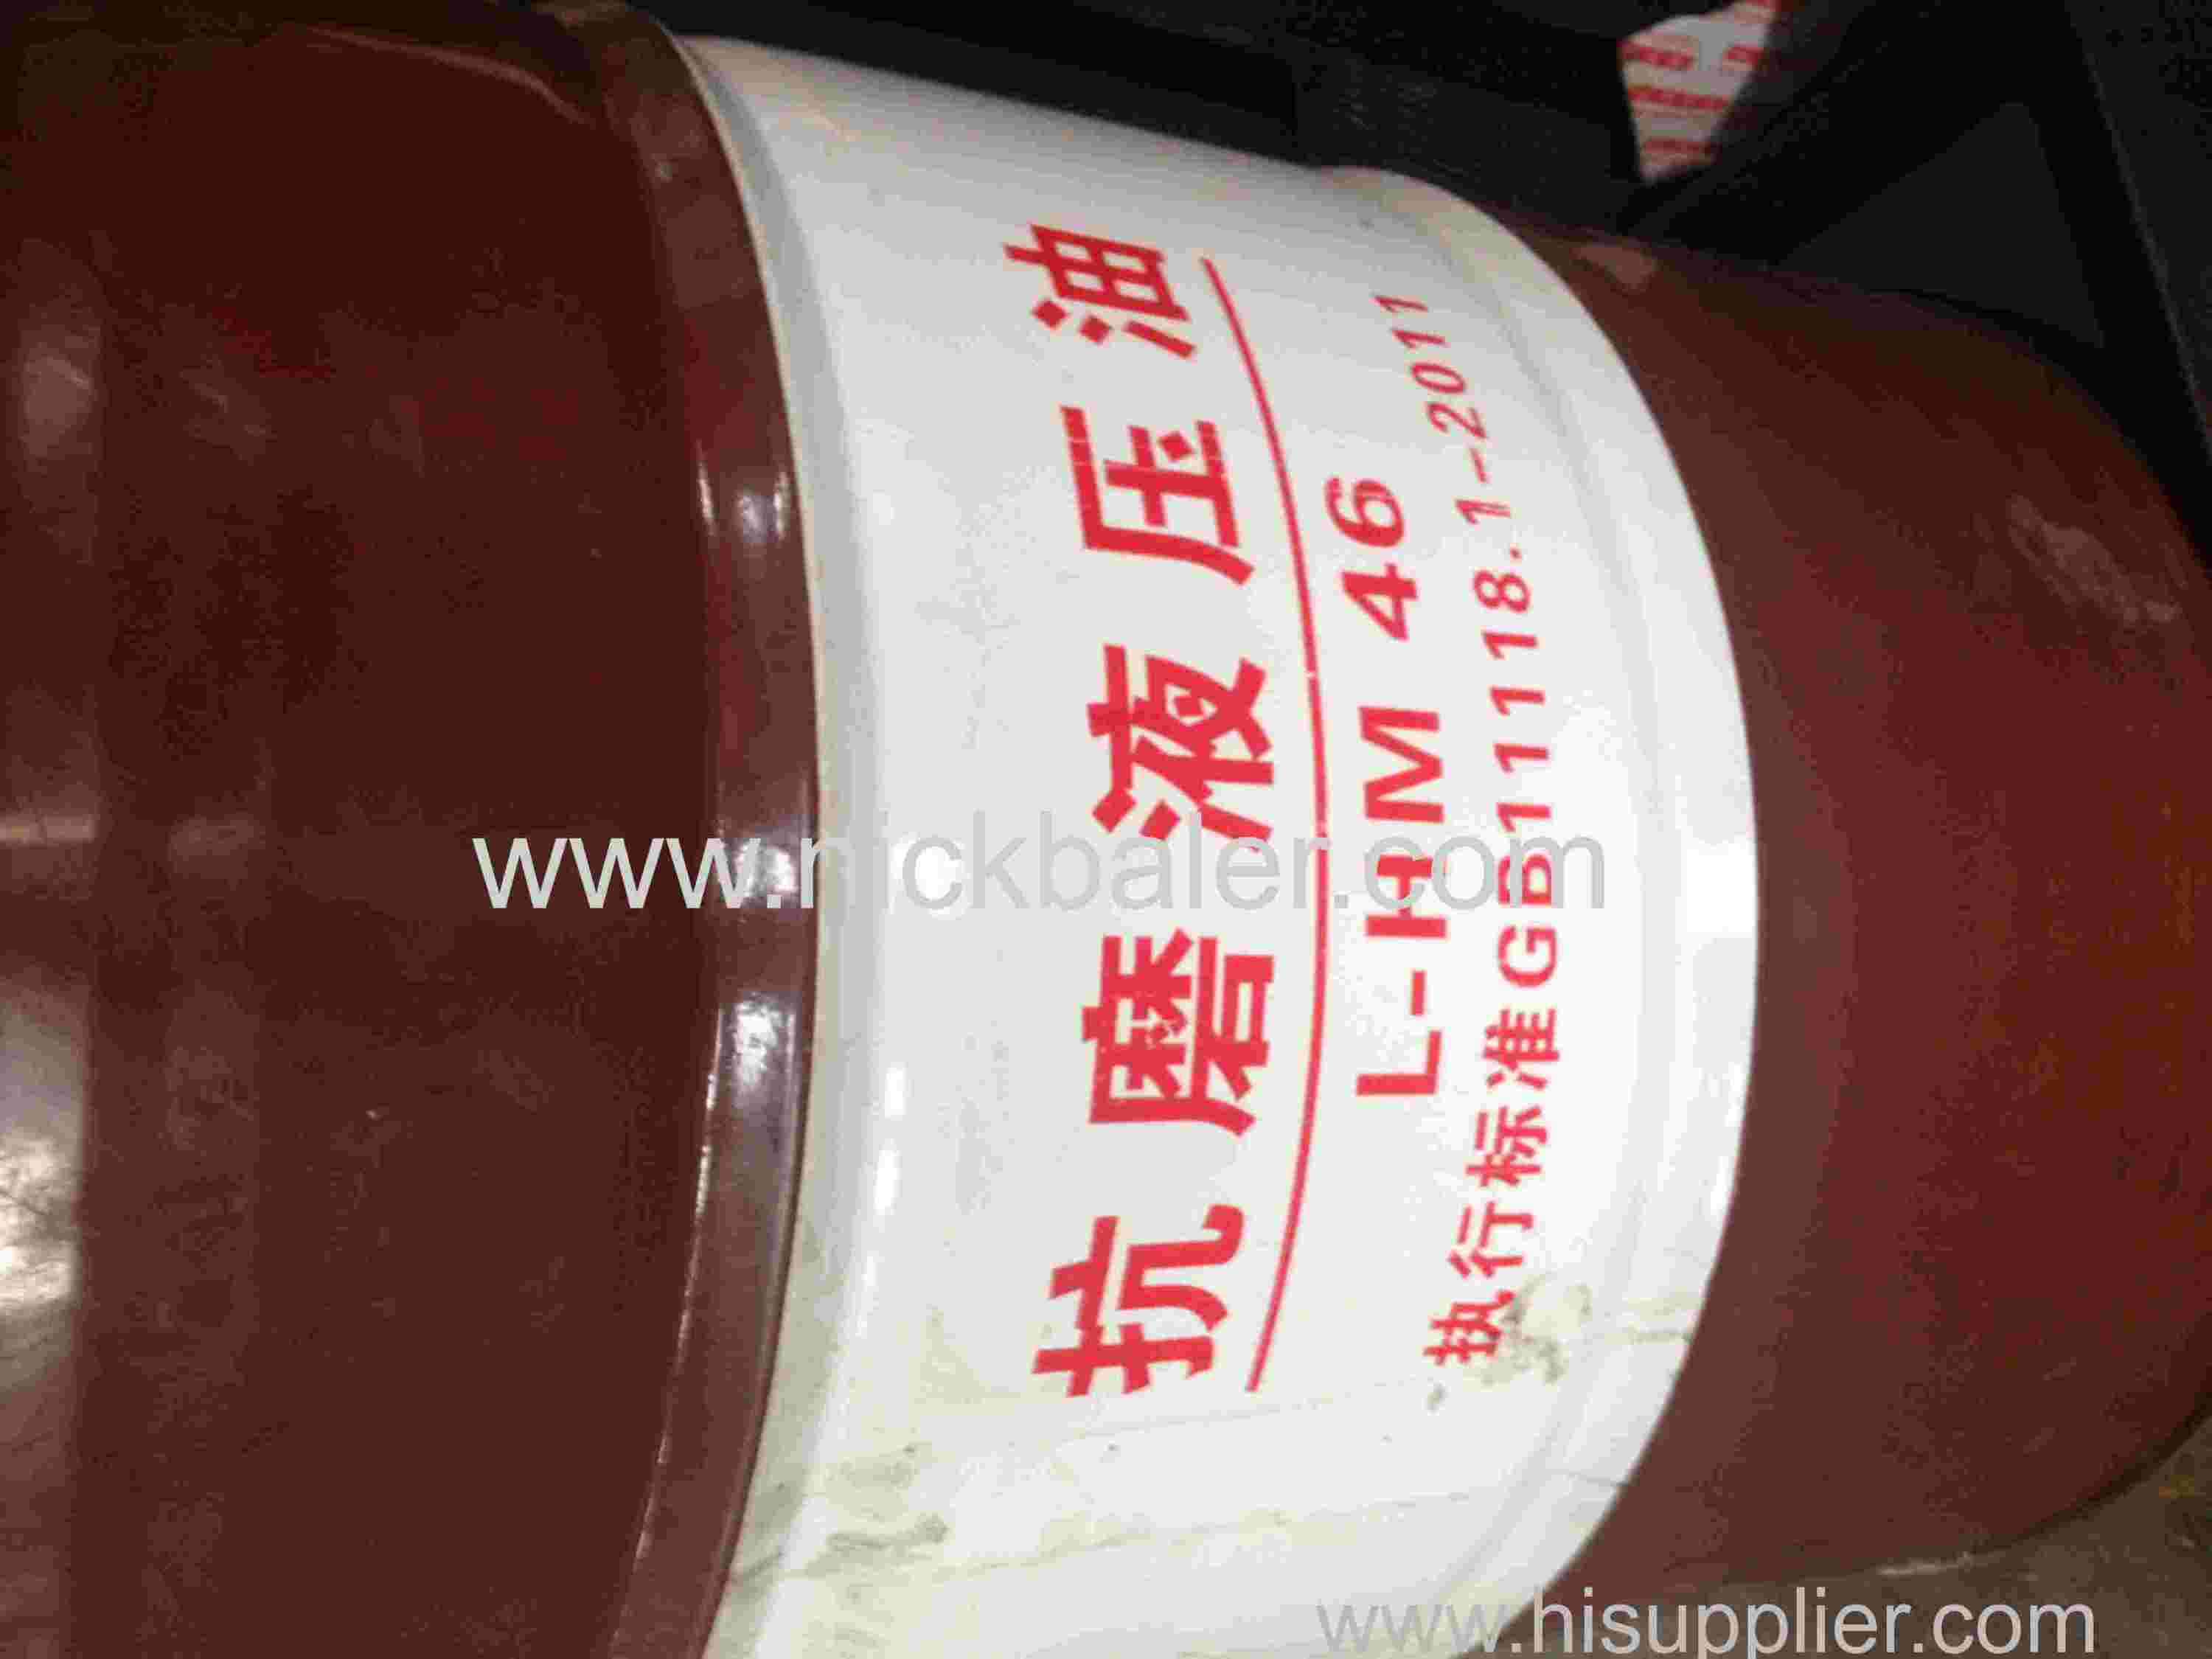 About the Hydraulic oil using in working condition